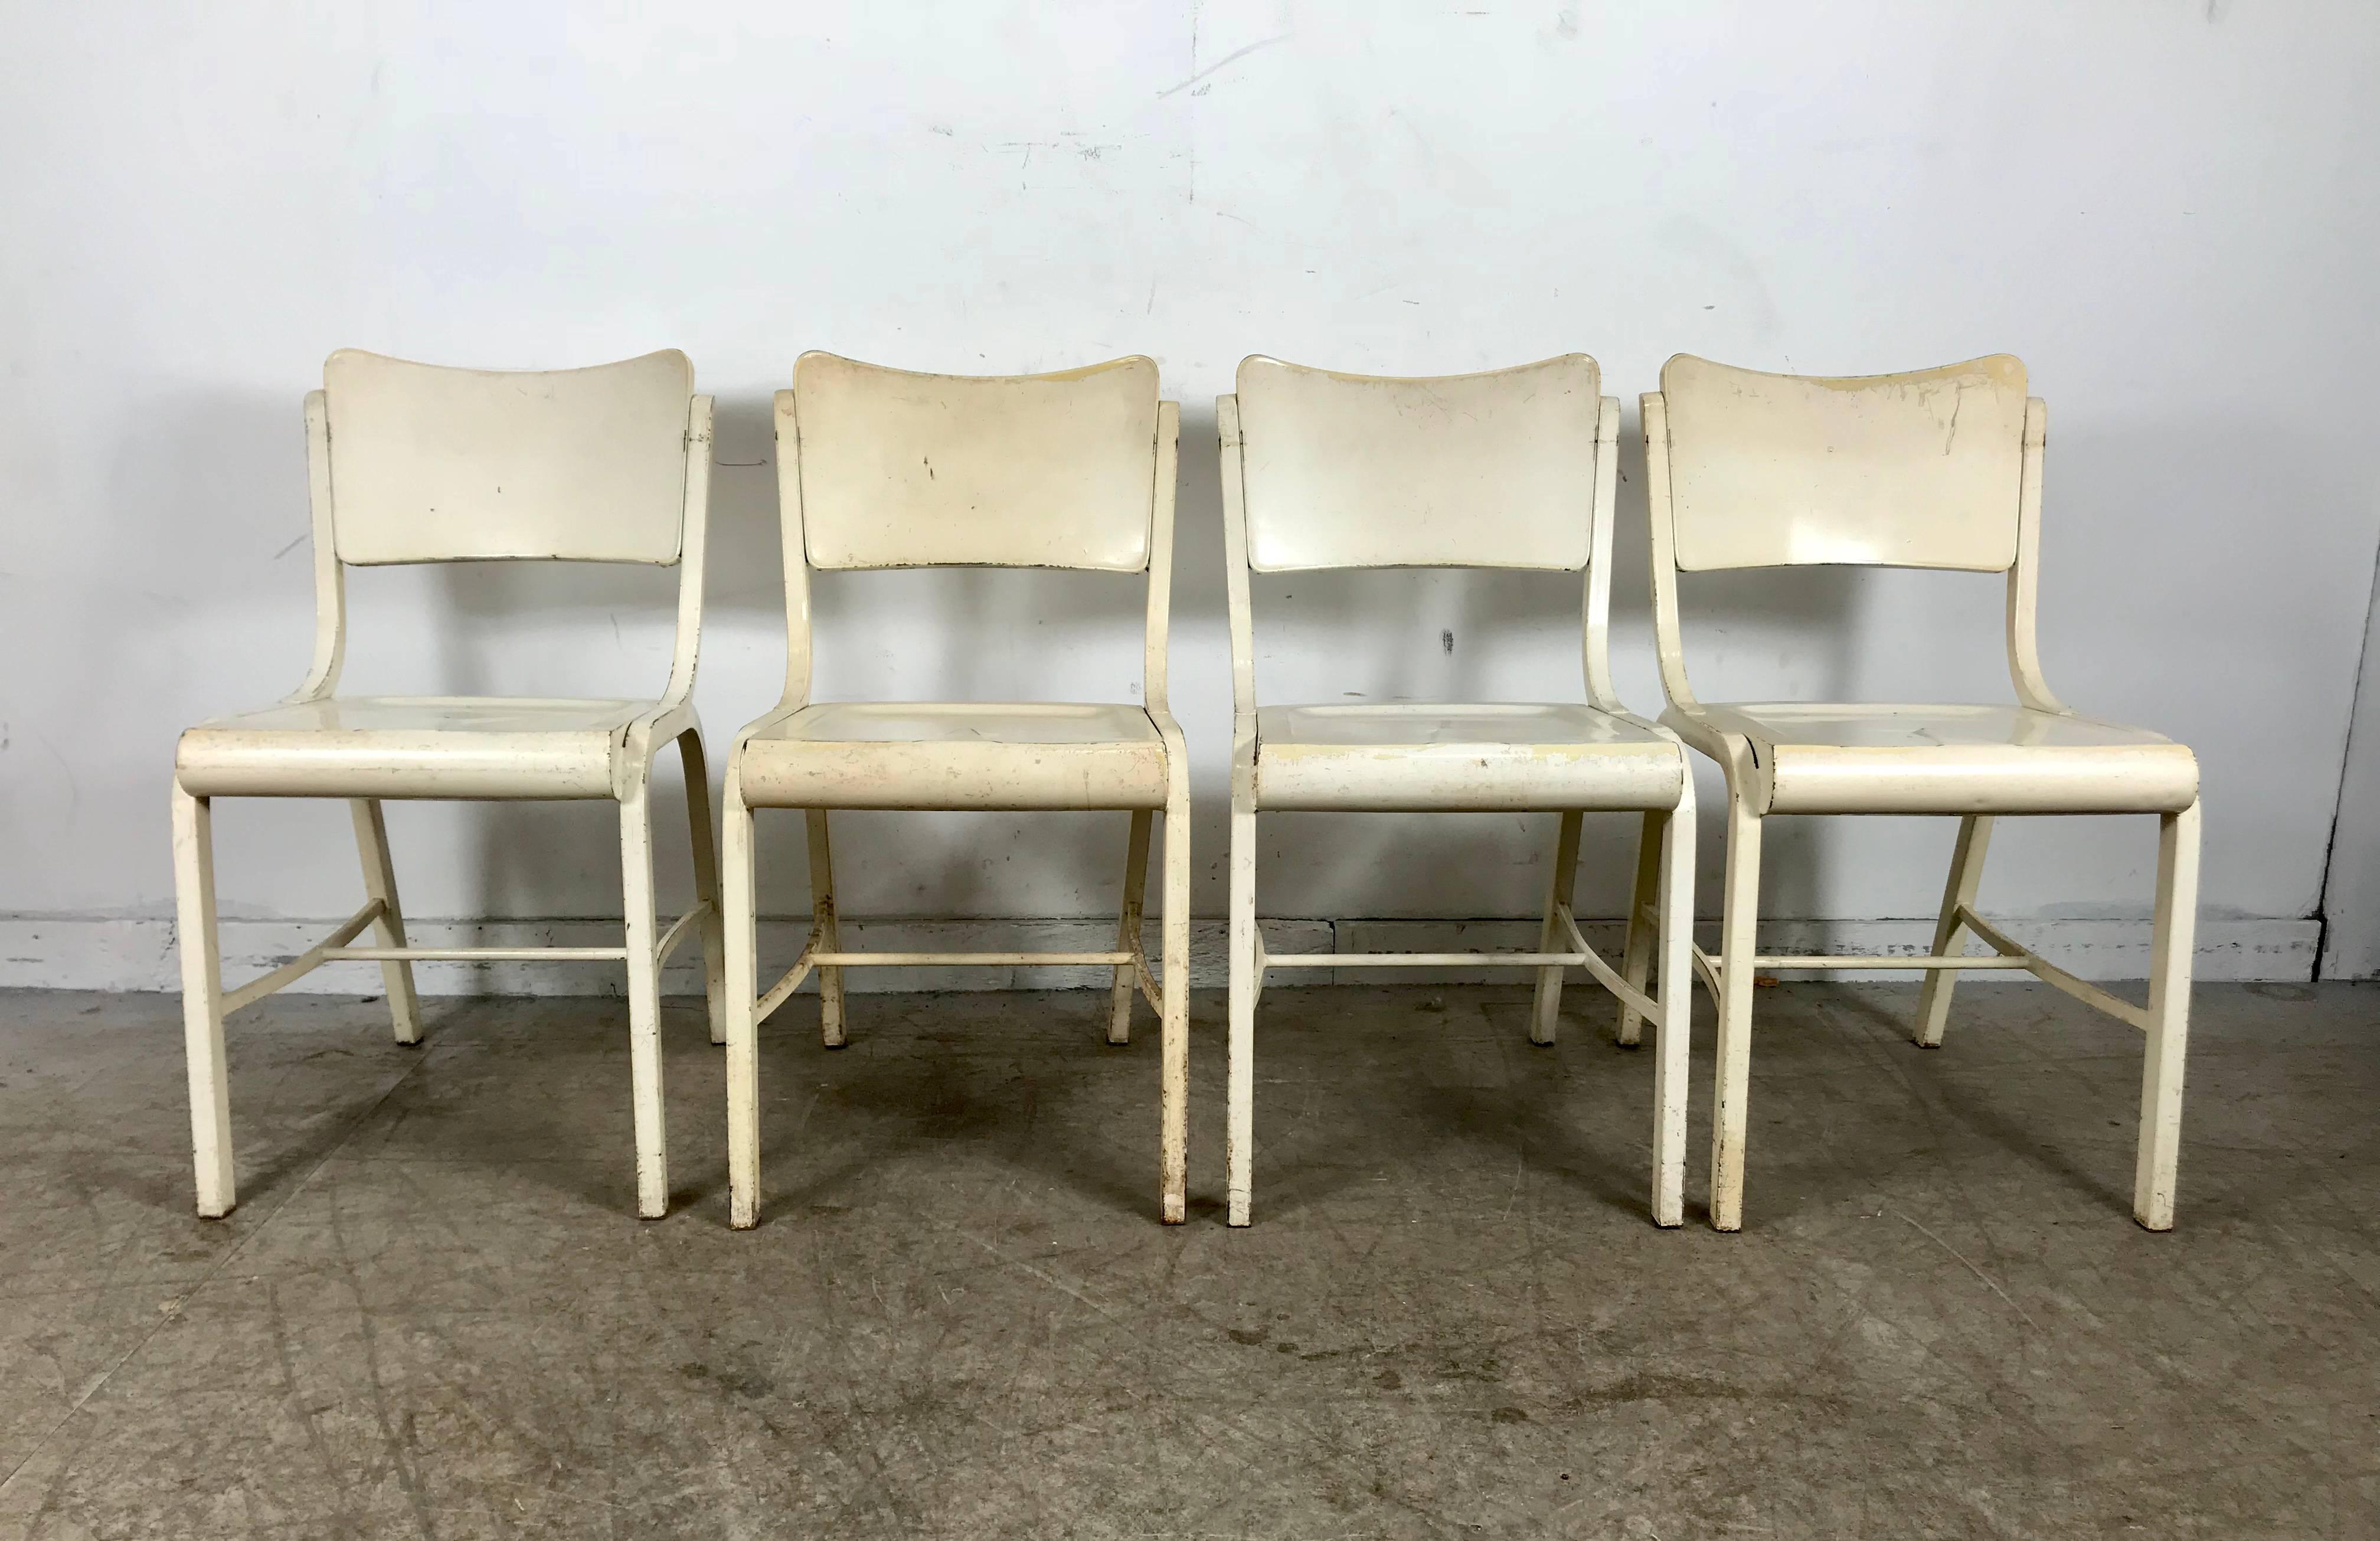 Set of four metal industrial side chairs manufactured by Doehler Metal Furn. Classic Art Deco period cafe chairs, retain original white painted finish, industrial yet elegant.